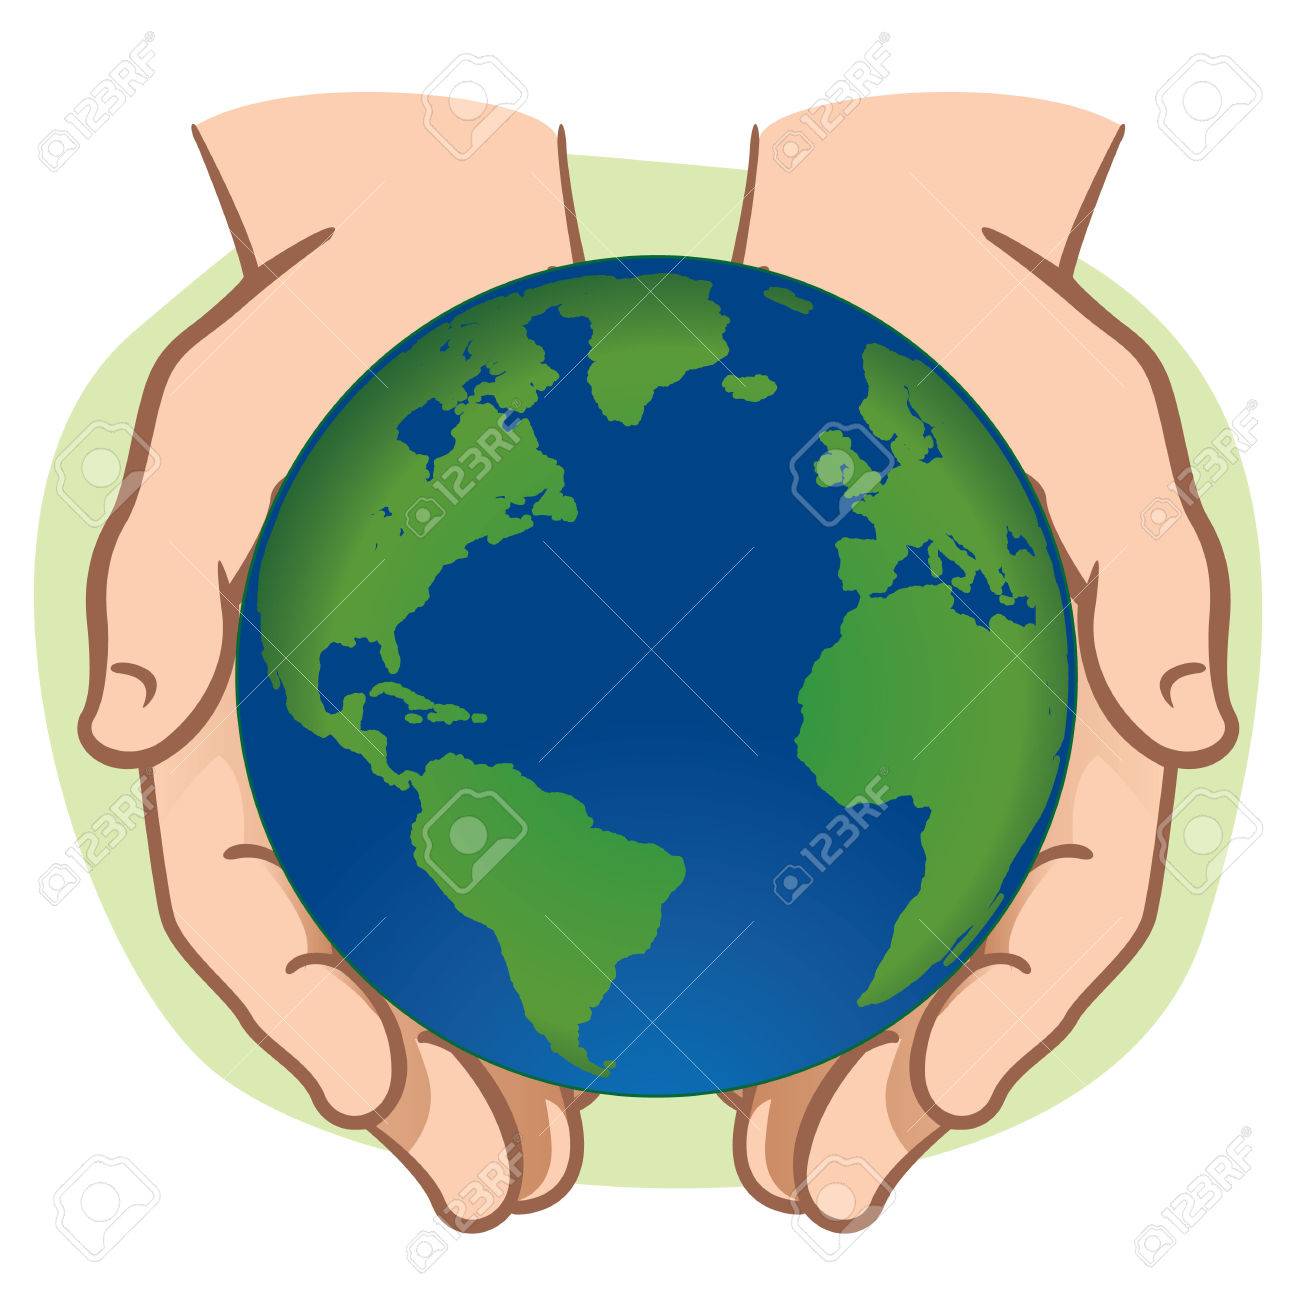 Hands holding earth.